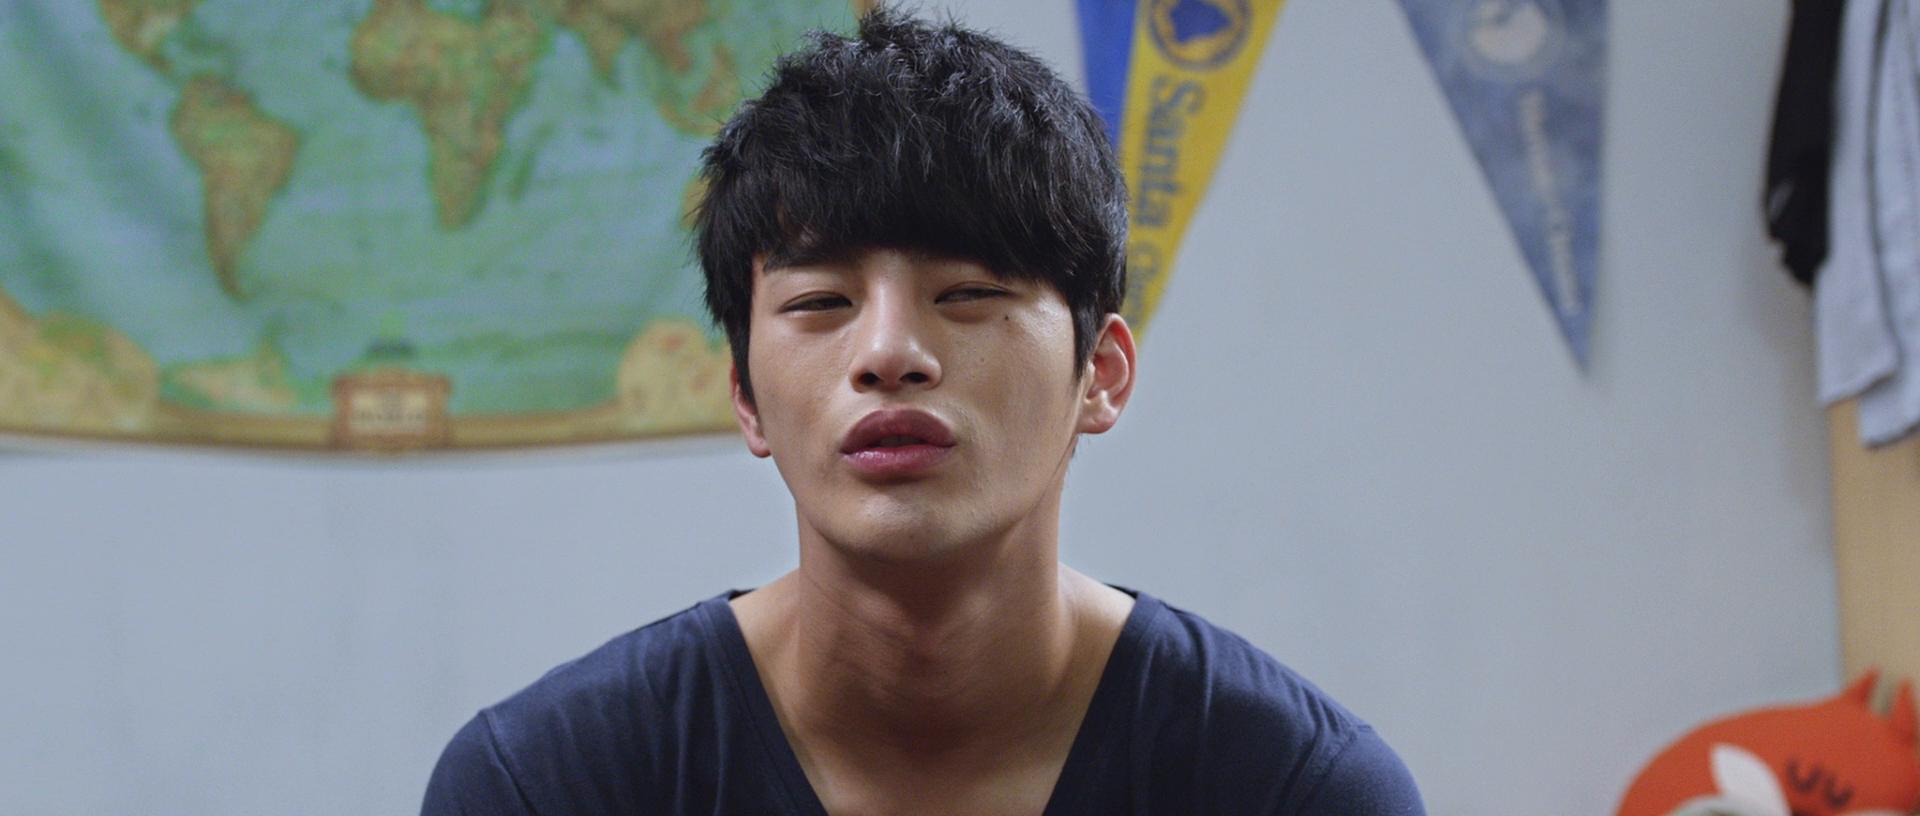 Ϣ No Breathing 2013 1080p BluRay x264 DTS-WiKi 11.91GB-4.png